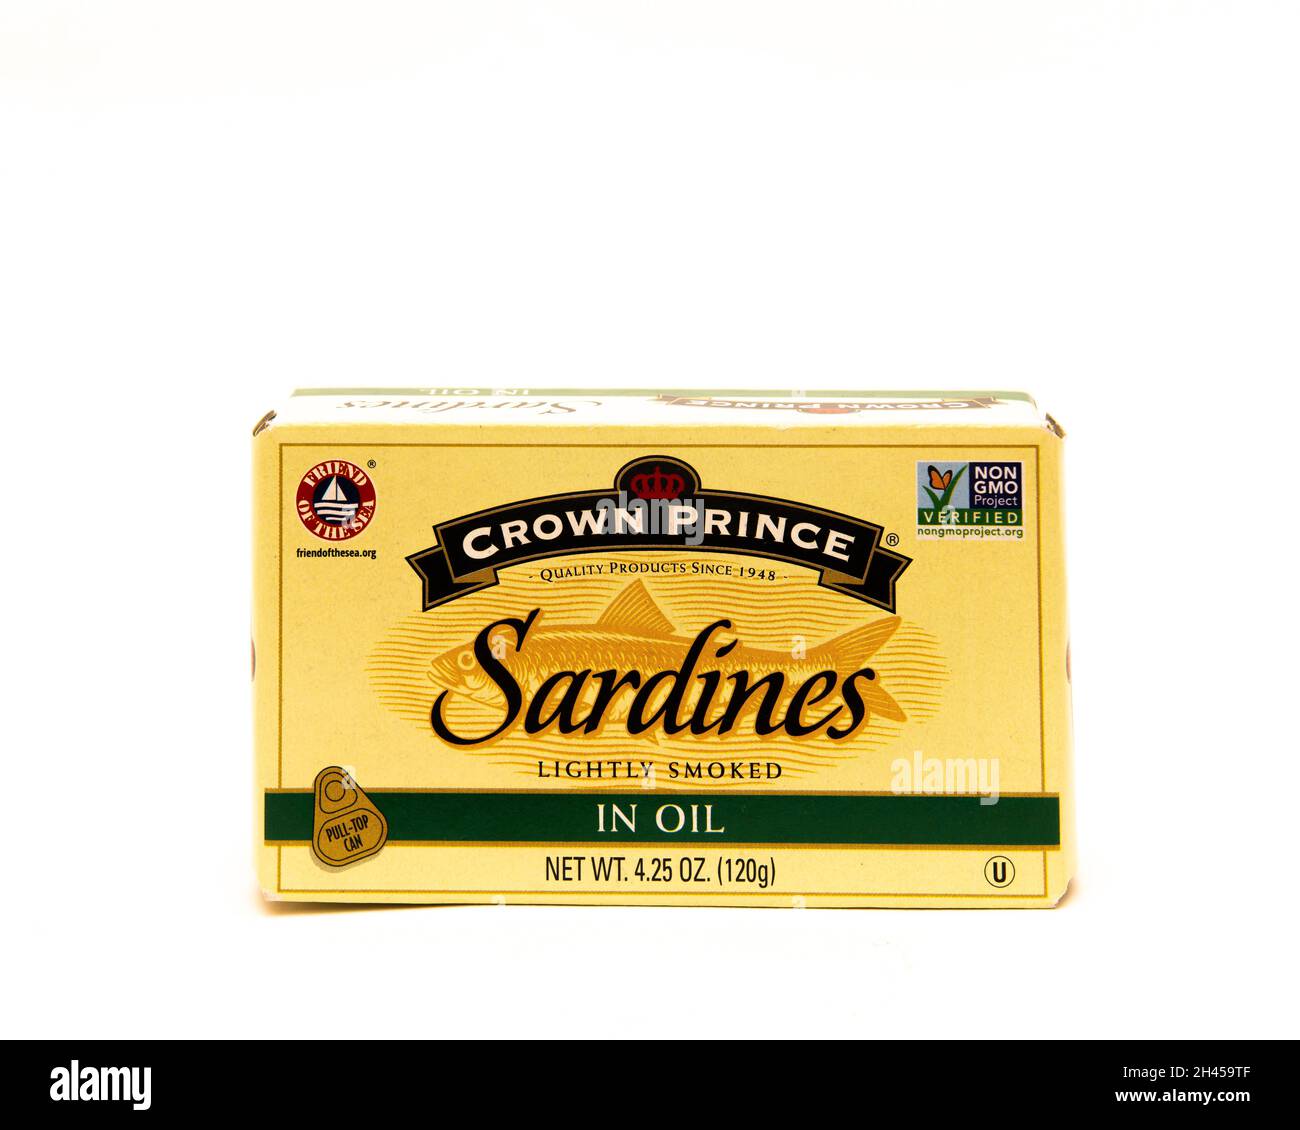 A can of Crown Prince Sardines lightly smoked and packed in soy bean  oil, packaged in a blue box. Stock Photo